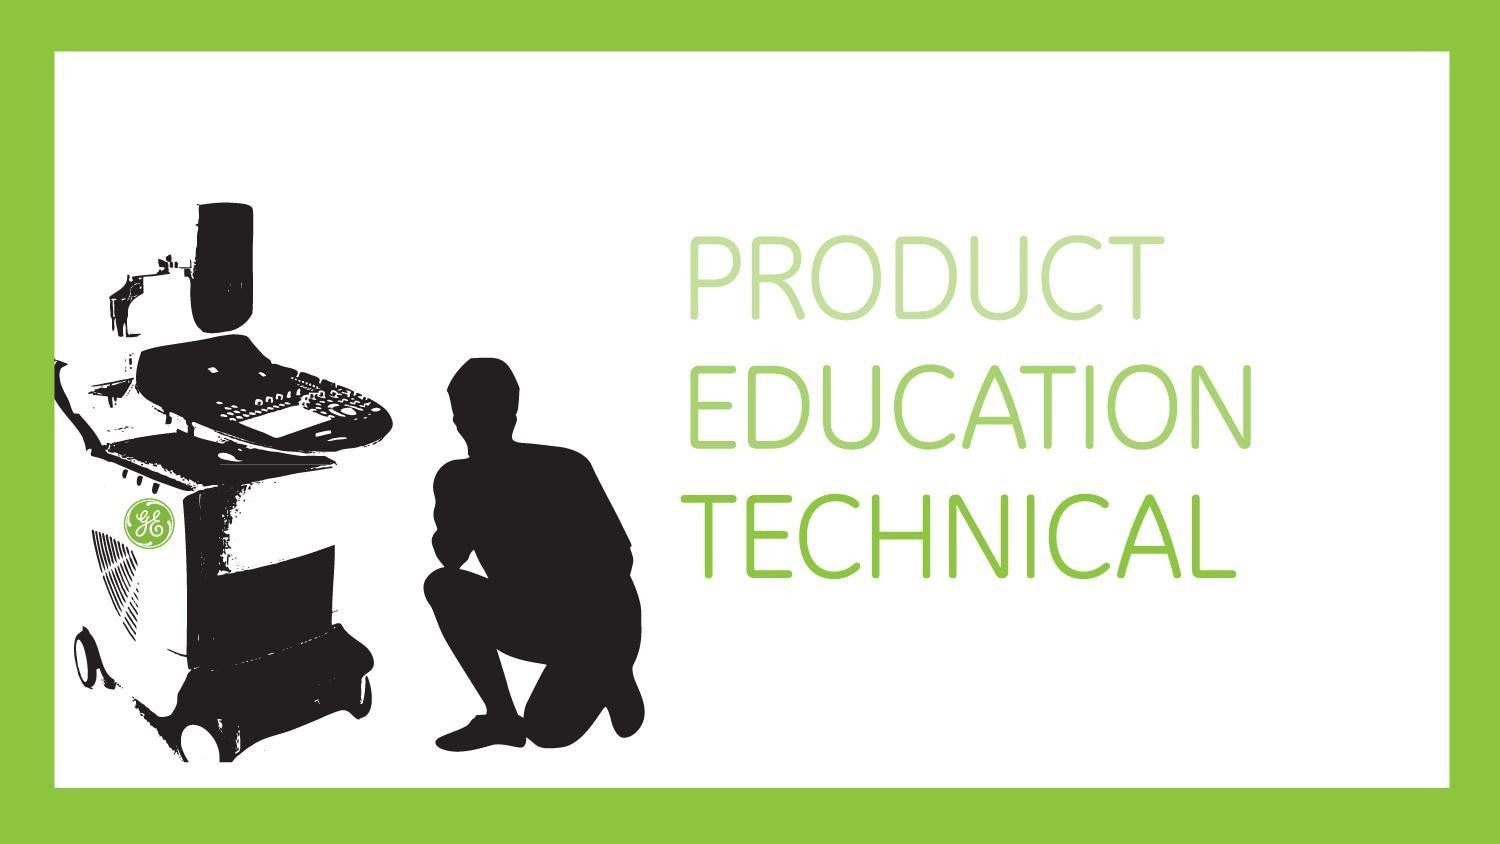 Product Education Technical.